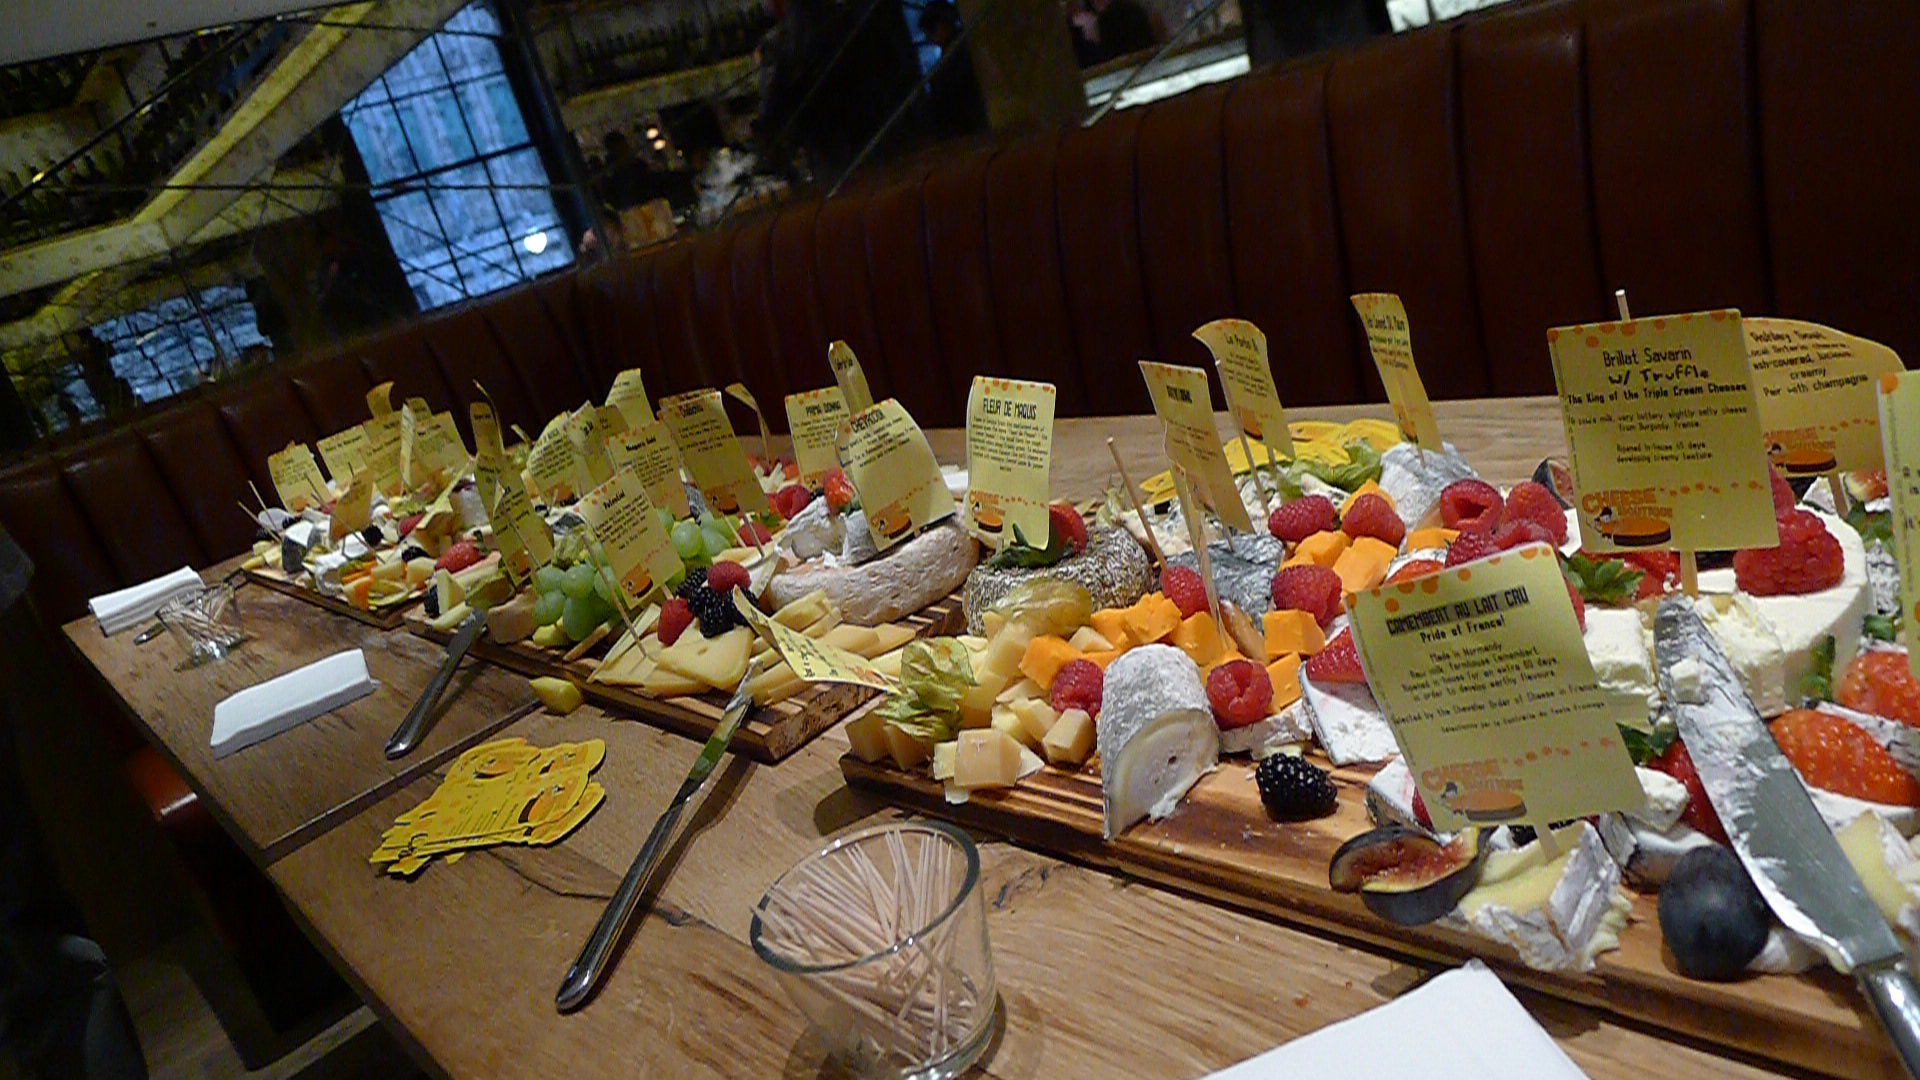 A terrific cheese display courtesy of Afrim at The Cheese Boutique.